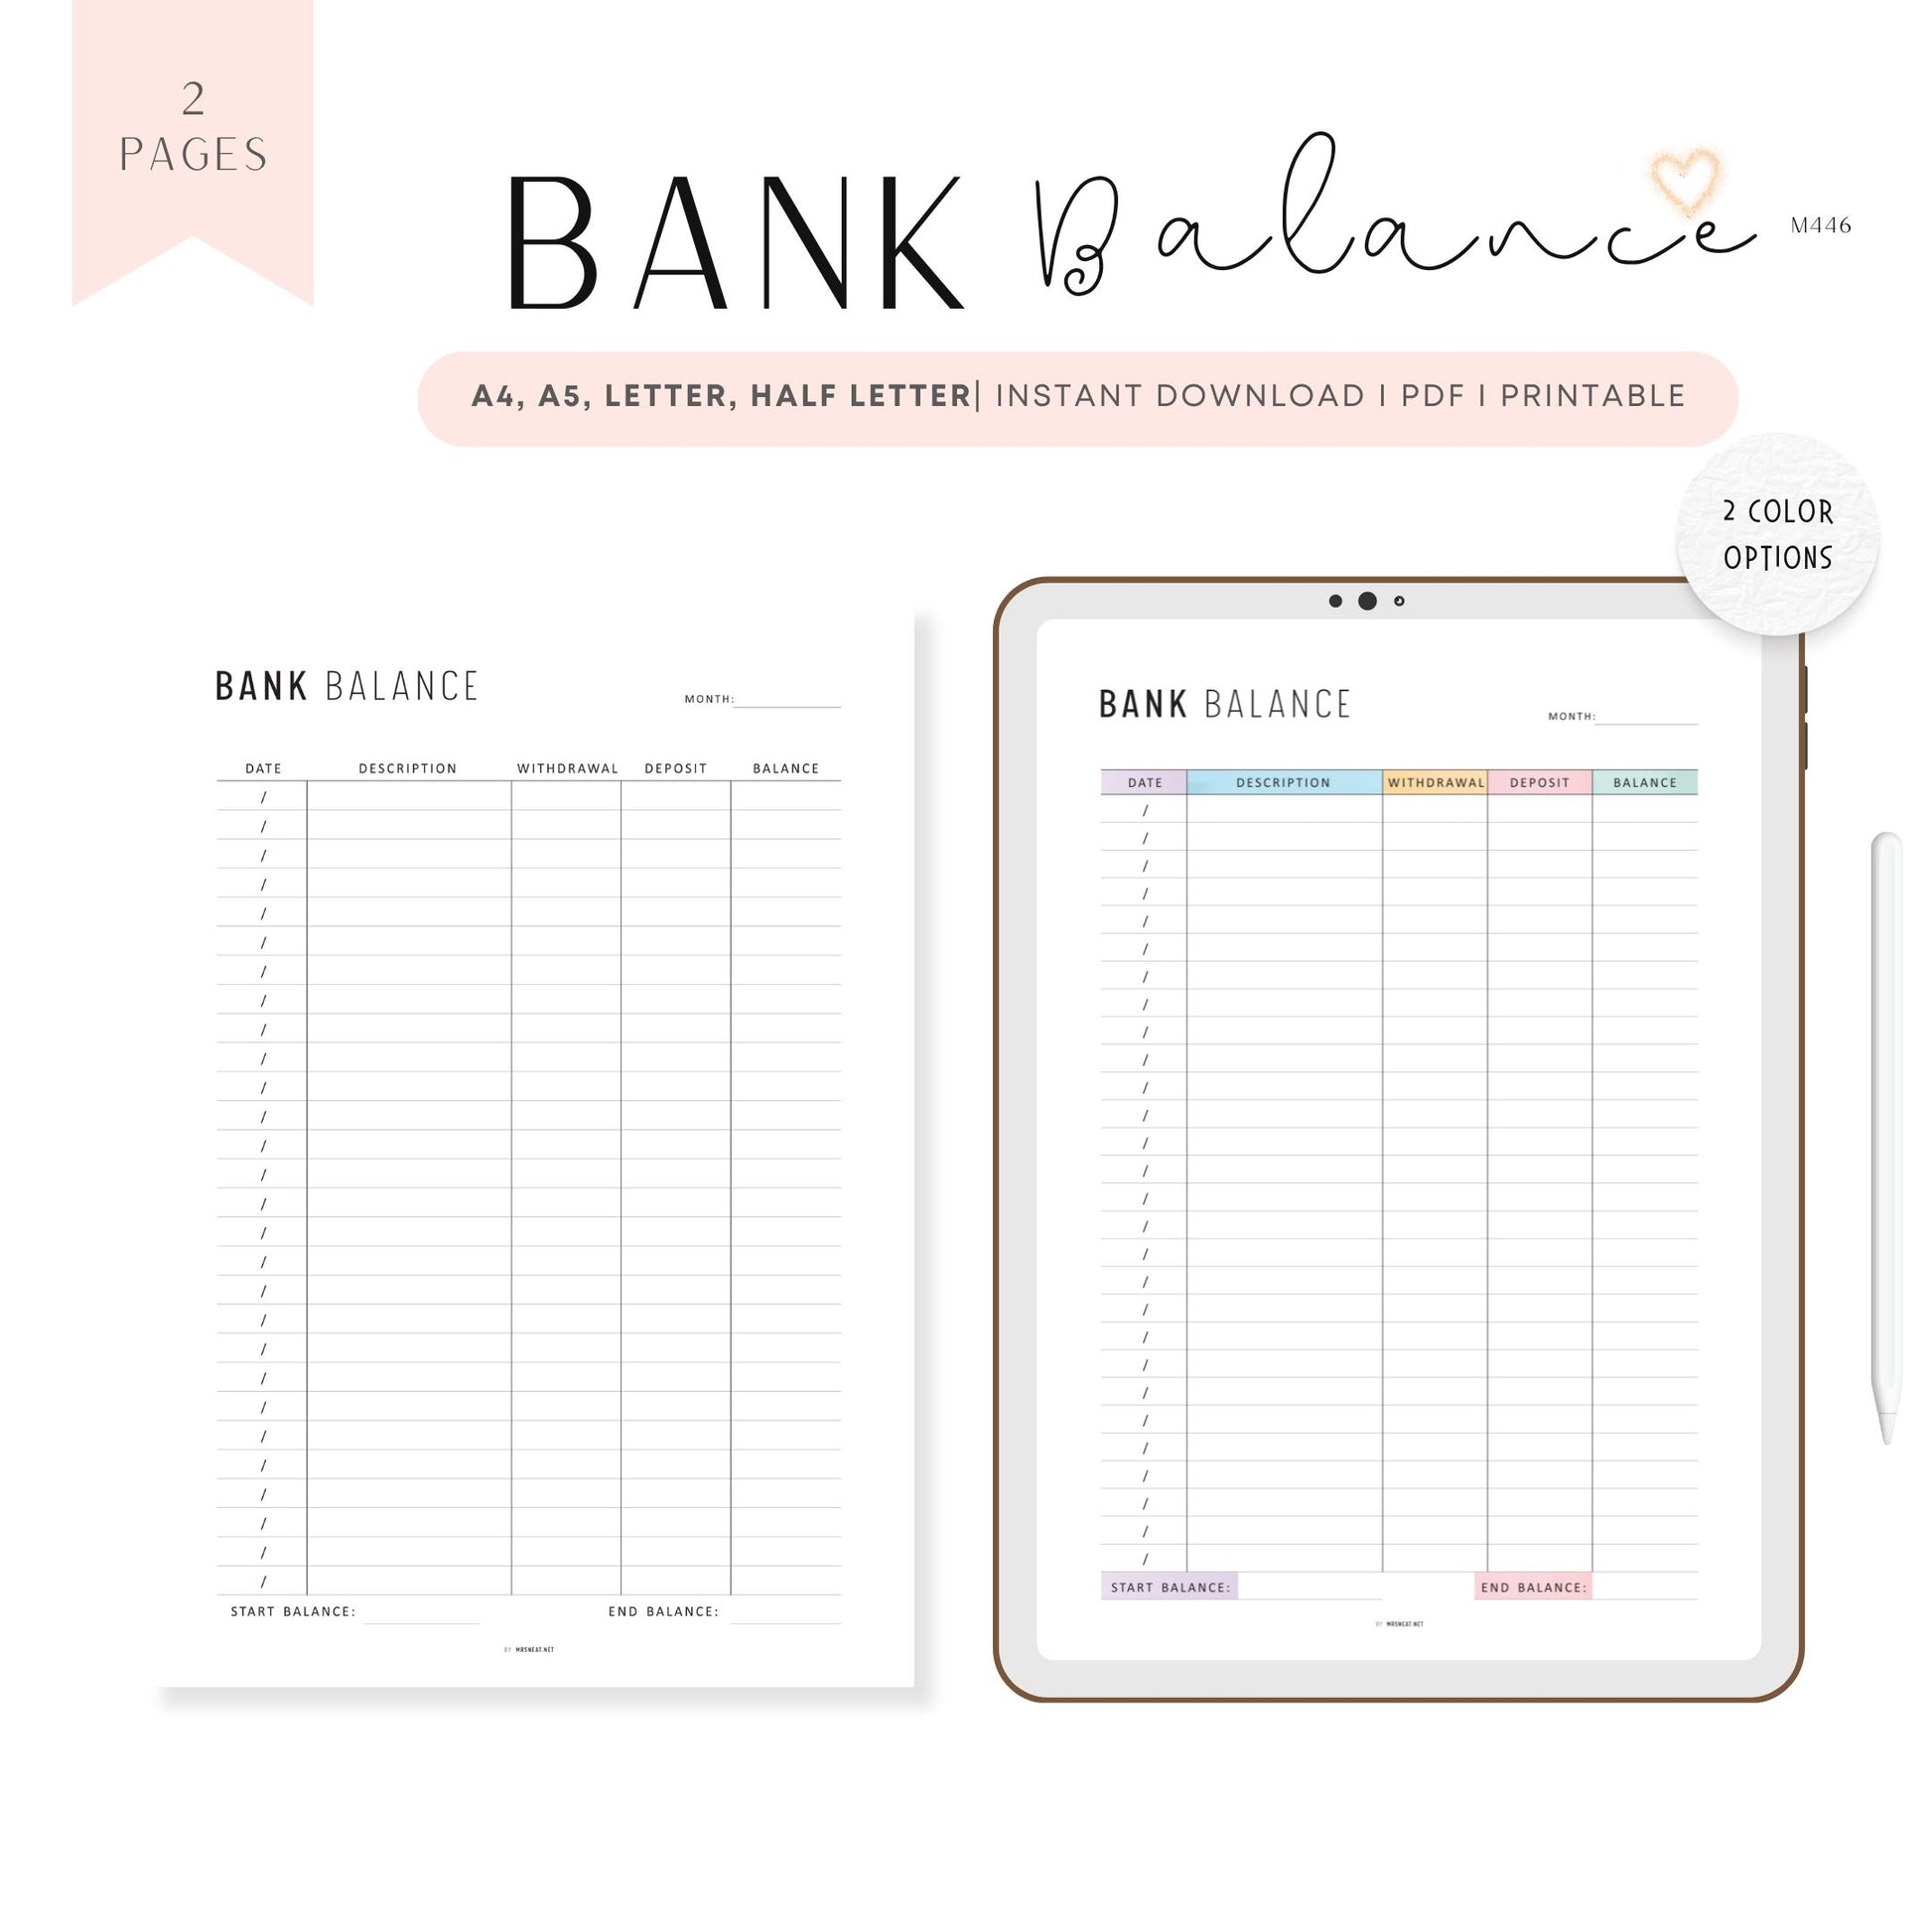 Bank Balance Sheet, Printable, A4, A5, Letter, Half Letter, Colorful and Minimalist Page